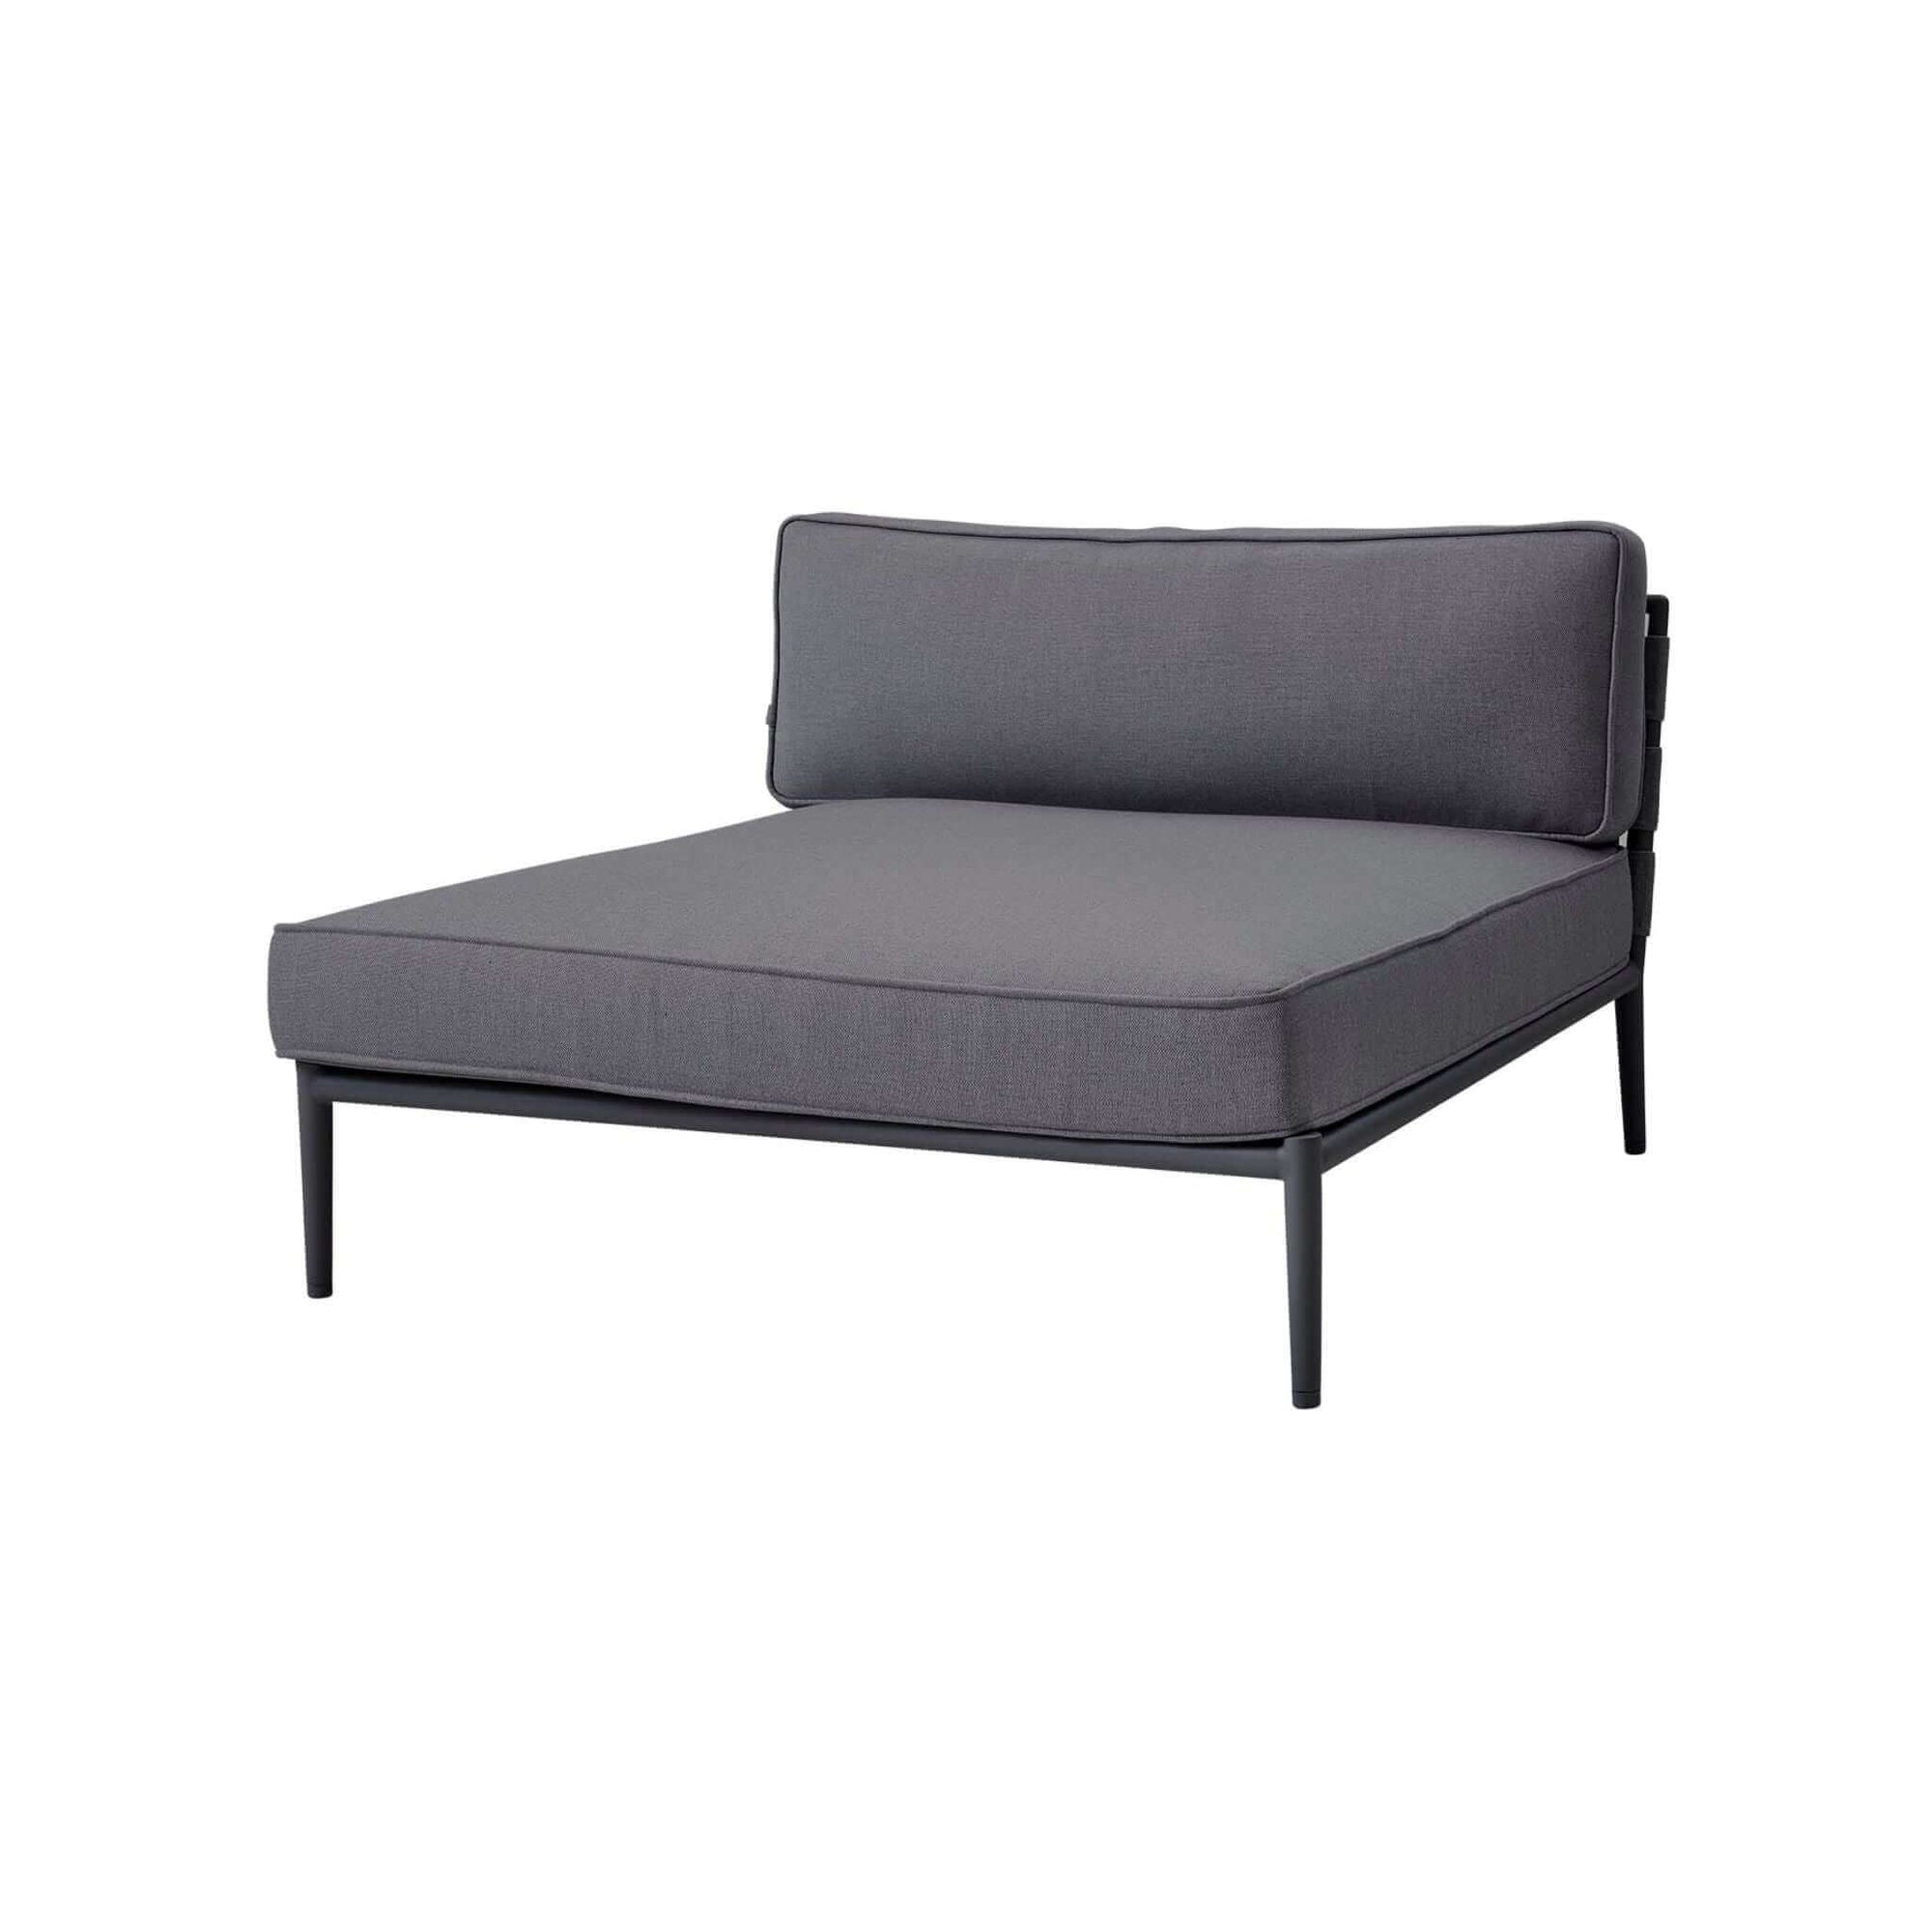 Cane-Line Conic Daybed Module-Grey, Cane-line AirTouch frame